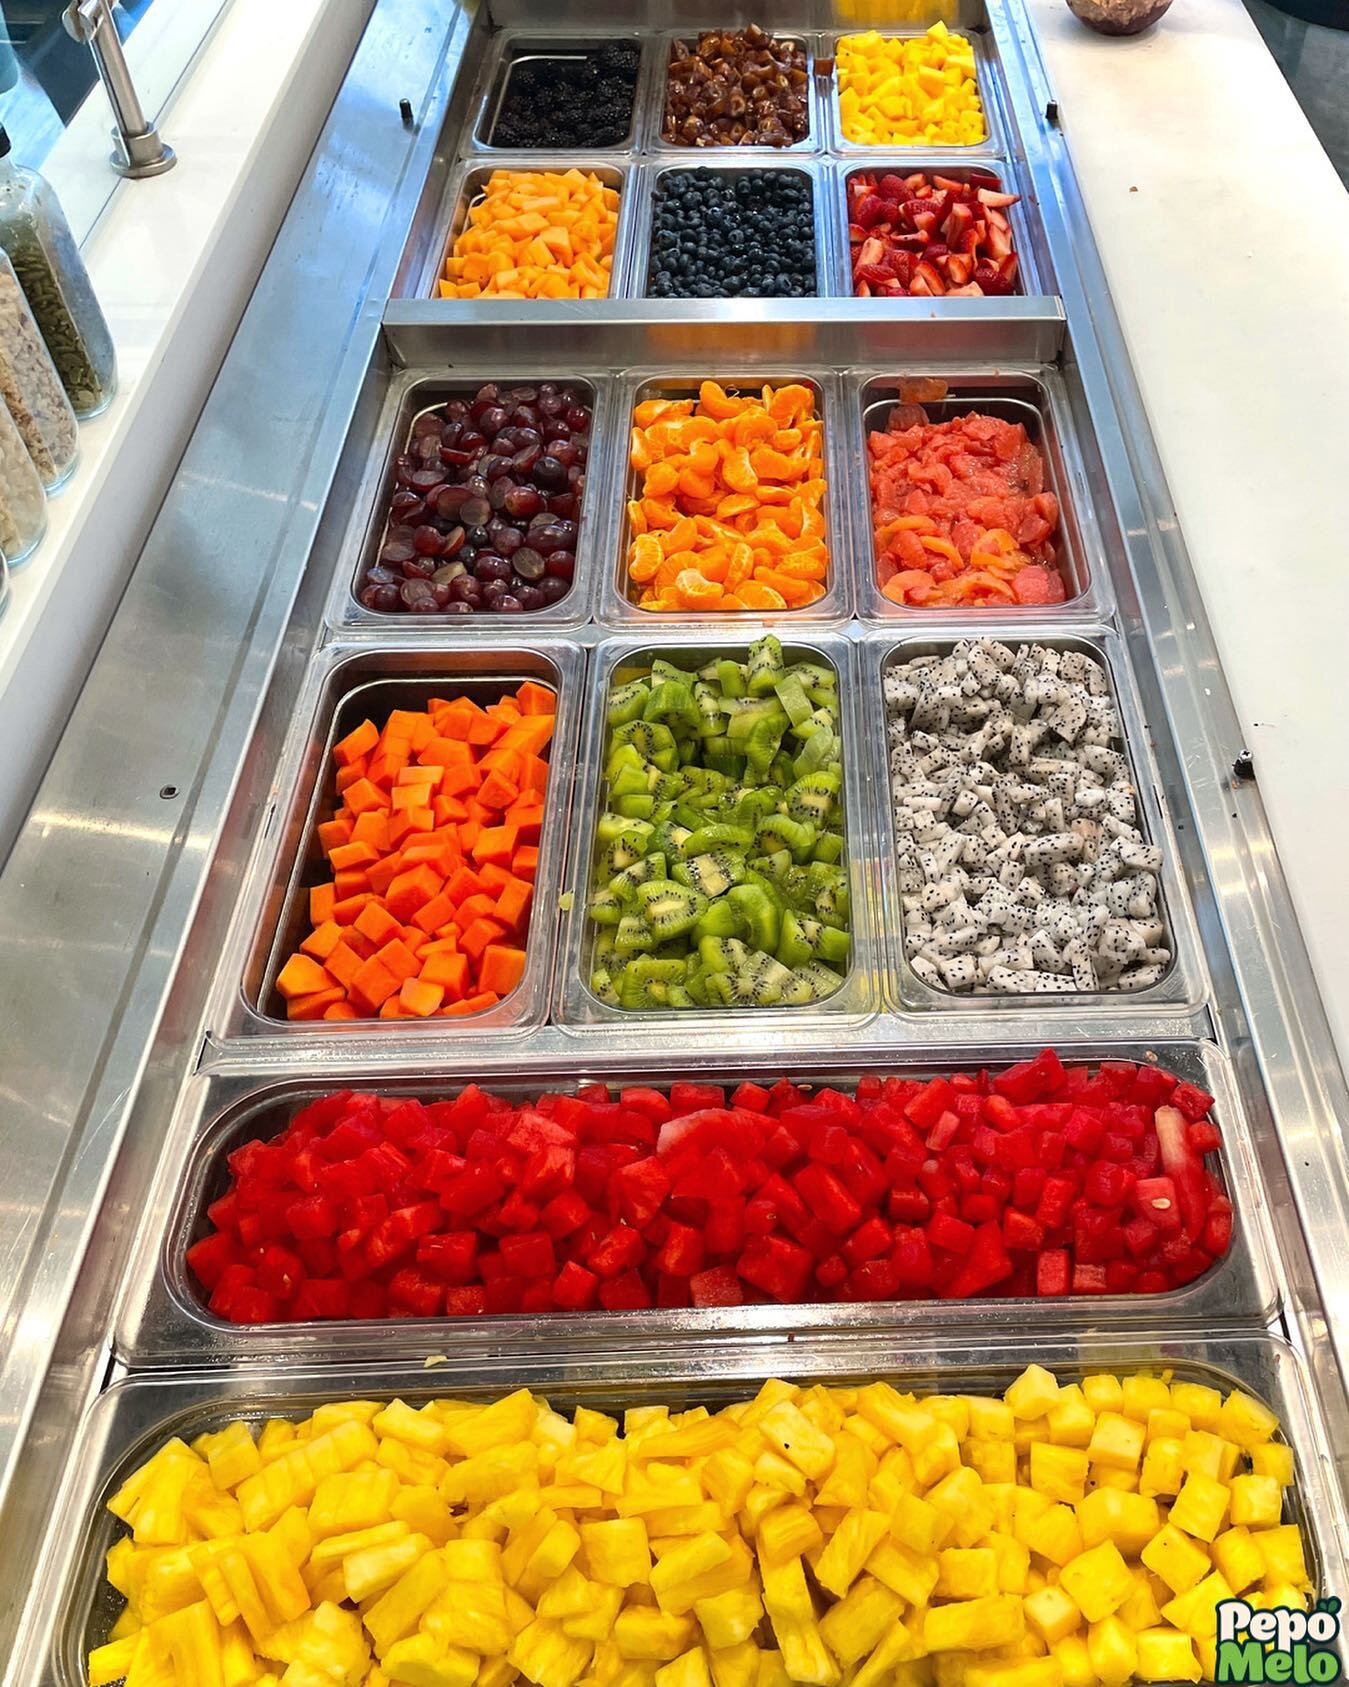 Ever seen an assortment of fruit this colorful and fresh? 😍🍓🍊🍌🥝🫐🍇
🍓
Tag us in your posts and stories for a chance to be featured!📱
🥝
Upland store: 659 W. Foothill Blvd, Upland, CA 91786 (Next to Tpumps, across the street from Upland High Sc